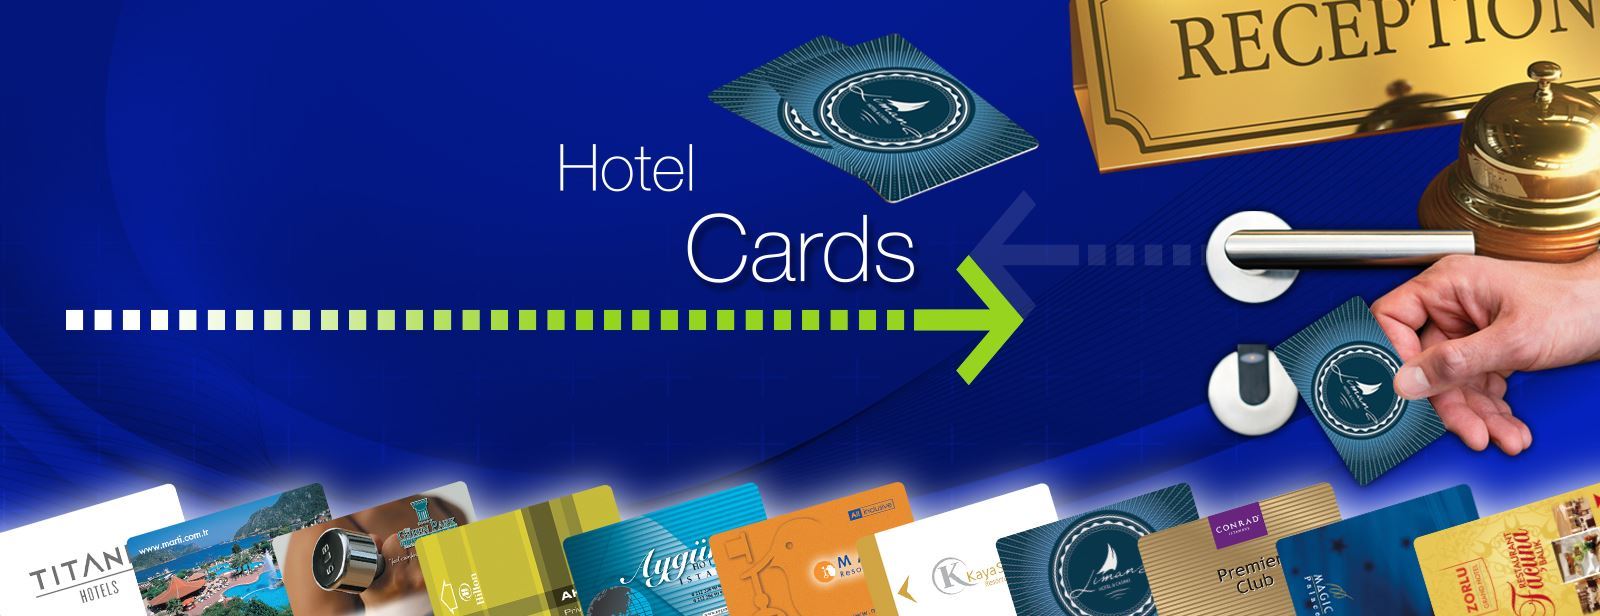 Hotel Cards